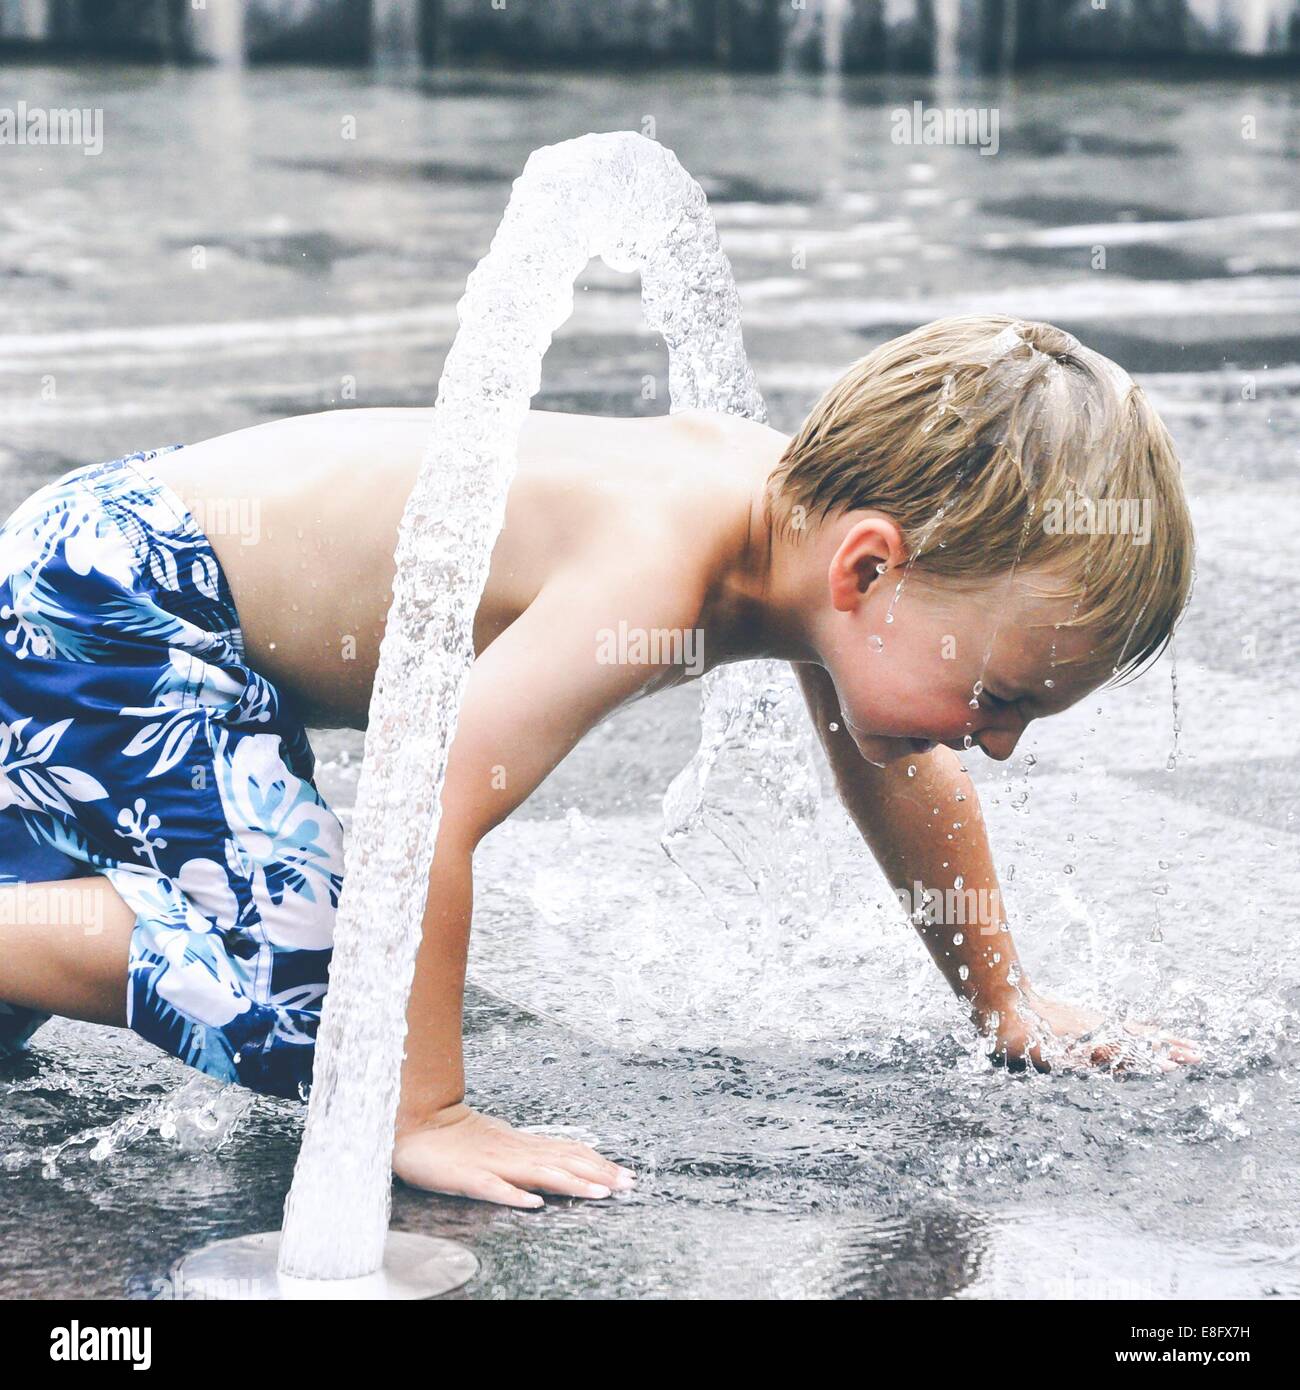 Boy playing in water fountain Stock Photo